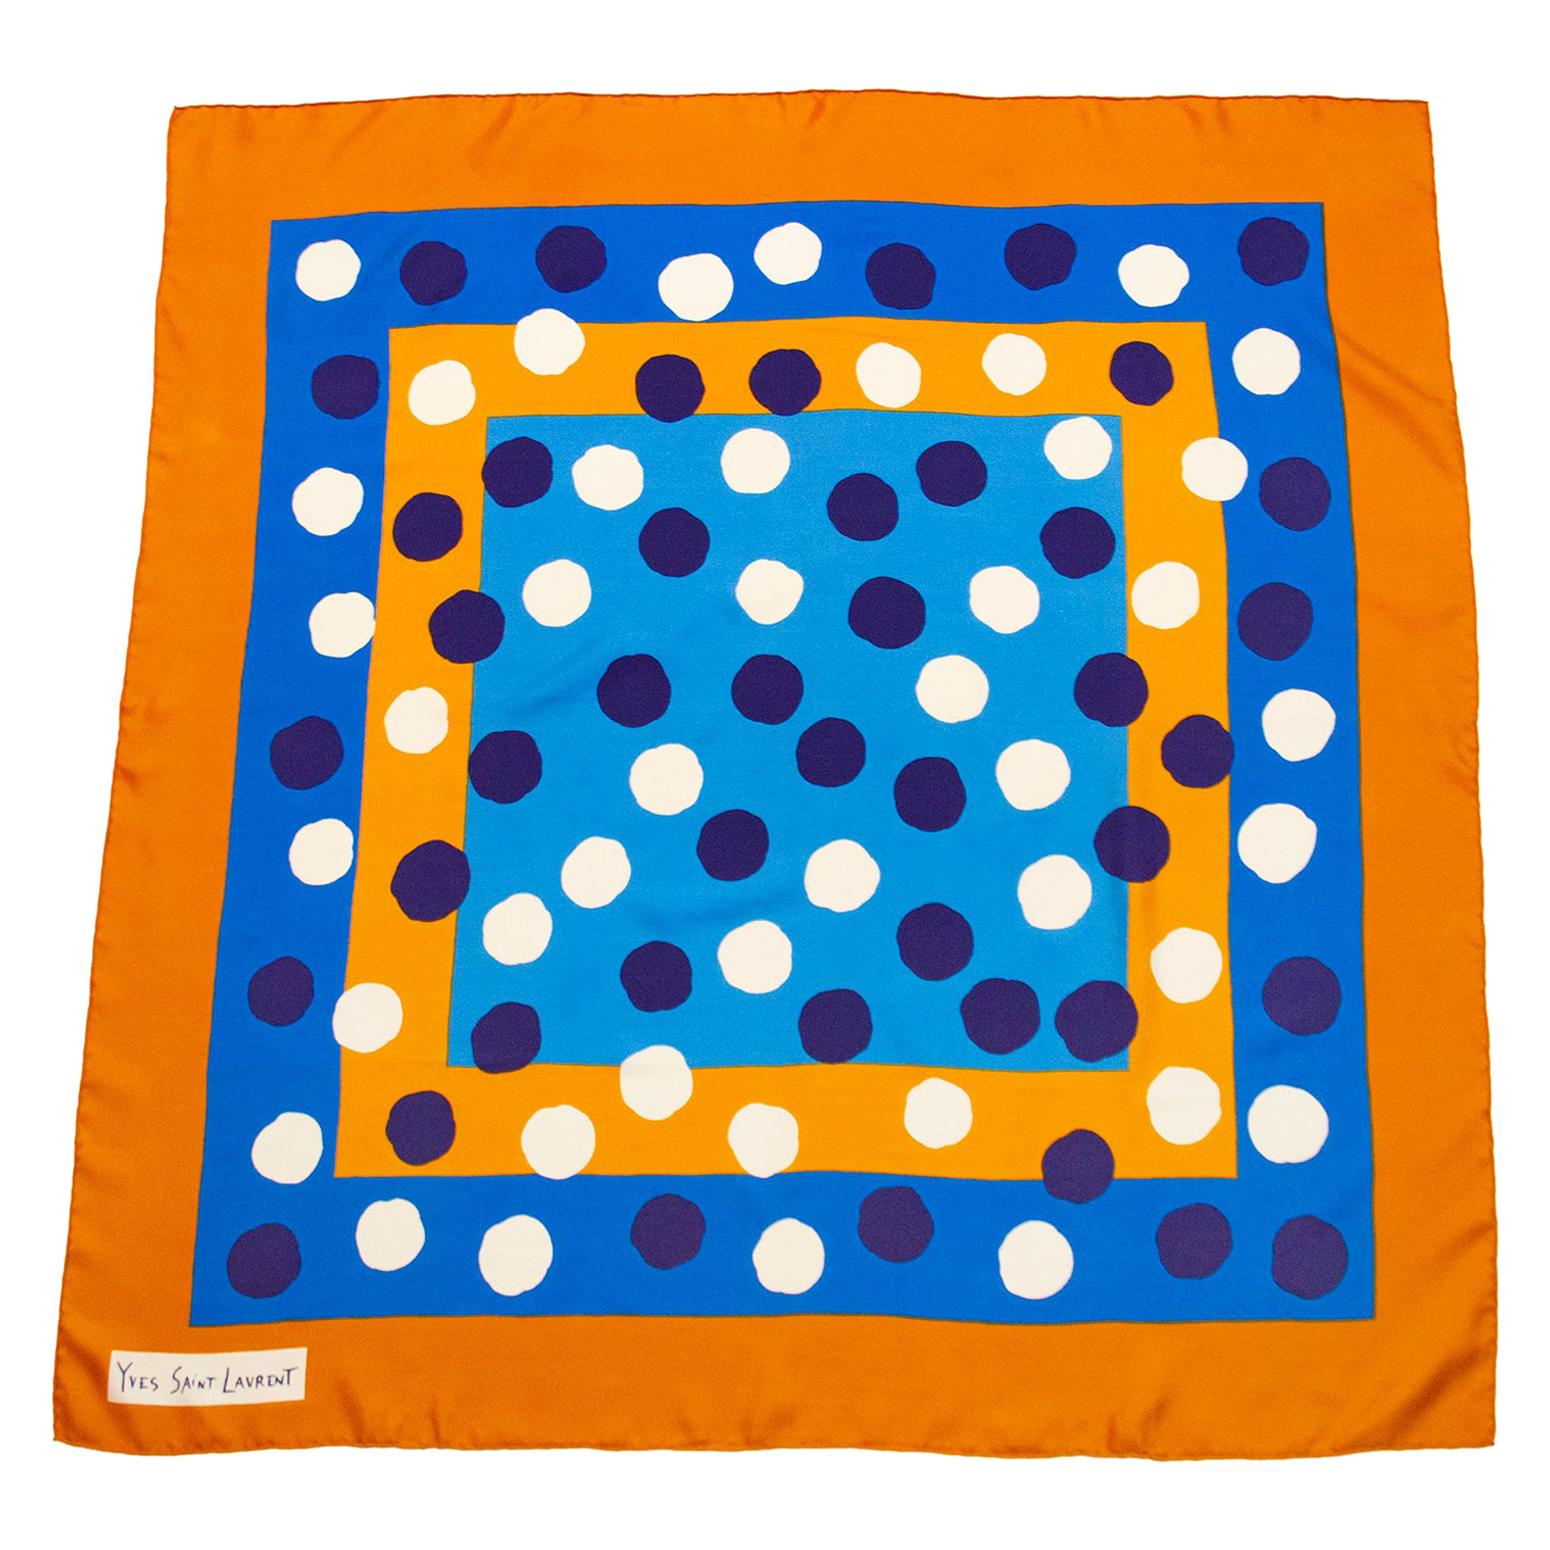 Mod Golden Scarf with Orange,Blue and Black Dotted Pattern.